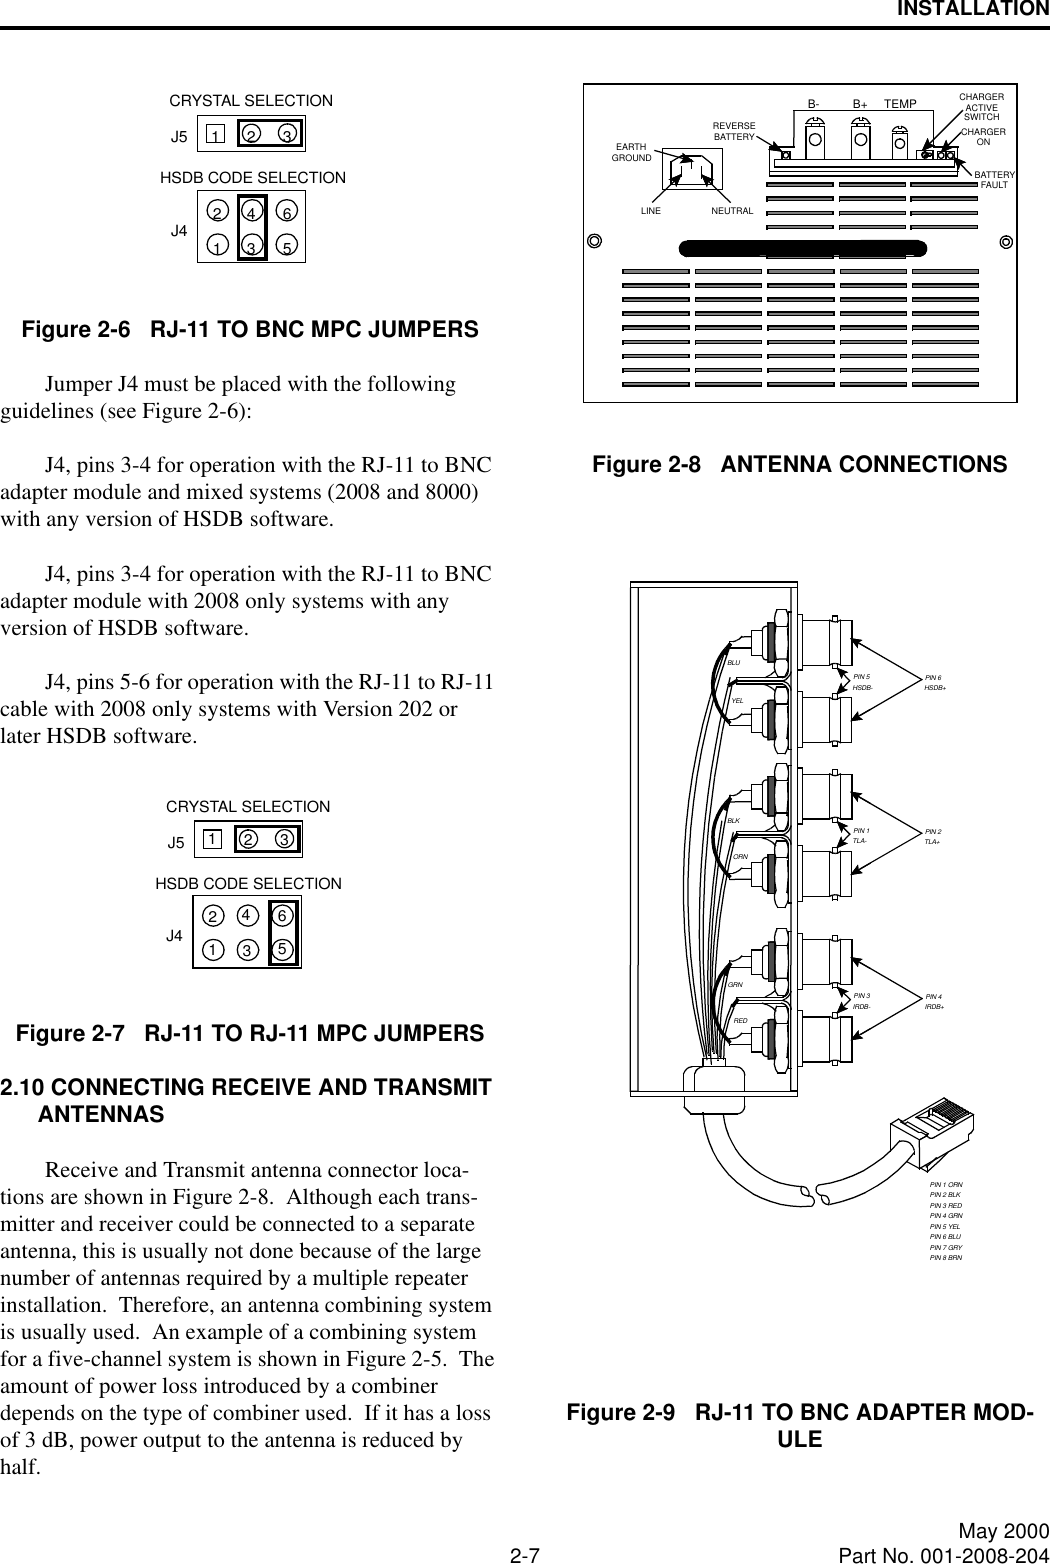 INSTALLATION2-7 May 2000Part No. 001-2008-204Figure 2-6   RJ-11 TO BNC MPC JUMPERSJumper J4 must be placed with the following guidelines (see Figure 2-6):J4, pins 3-4 for operation with the RJ-11 to BNC adapter module and mixed systems (2008 and 8000) with any version of HSDB software.J4, pins 3-4 for operation with the RJ-11 to BNC adapter module with 2008 only systems with any version of HSDB software.J4, pins 5-6 for operation with the RJ-11 to RJ-11 cable with 2008 only systems with Version 202 or later HSDB software.Figure 2-7   RJ-11 TO RJ-11 MPC JUMPERS2.10 CONNECTING RECEIVE AND TRANSMIT ANTENNASReceive and Transmit antenna connector loca-tions are shown in Figure 2-8.  Although each trans-mitter and receiver could be connected to a separate antenna, this is usually not done because of the large number of antennas required by a multiple repeater installation.  Therefore, an antenna combining system is usually used.  An example of a combining system for a five-channel system is shown in Figure 2-5.  The amount of power loss introduced by a combiner depends on the type of combiner used.  If it has a loss of 3 dB, power output to the antenna is reduced by half.Figure 2-8   ANTENNA CONNECTIONSFigure 2-9   RJ-11 TO BNC ADAPTER MOD-ULE231J5J4 123465HSDB CODE SELECTIONCRYSTAL SELECTION231J5J4 123465HSDB CODE SELECTIONCRYSTAL SELECTIONB- B+ TEMP ACTIVECHARGERONCHARGERFAULTBATTERYBATTERYREVERSEGROUNDEARTHNEUTRALLINESWITCHPIN 2 BLKPIN 3 REDPIN 4 GRNPIN 5 YELPIN 6 BLUPIN 7 GRYPIN 8 BRNORNPIN 2TLA+PIN 1TLA-GRNBLKHSDB-PIN 5HSDB+PIN 6YELBLUPIN 1 ORNPIN 4PIN 3REDIRDB- IRDB+